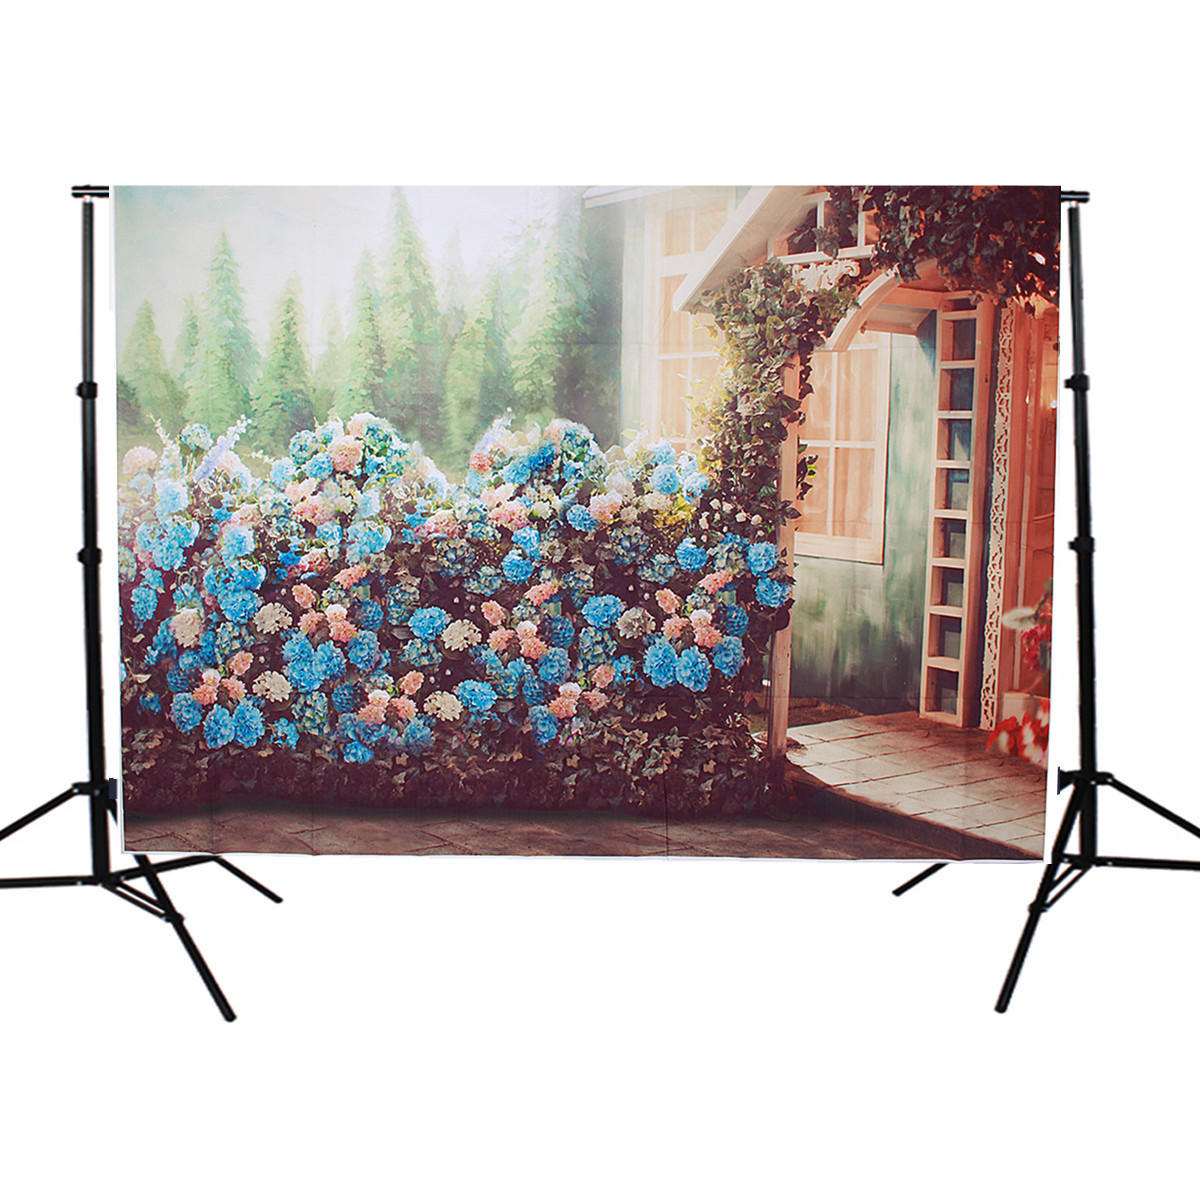 5x7FT Cabin Flower Fence Photography Backdrop Background Studio Prop